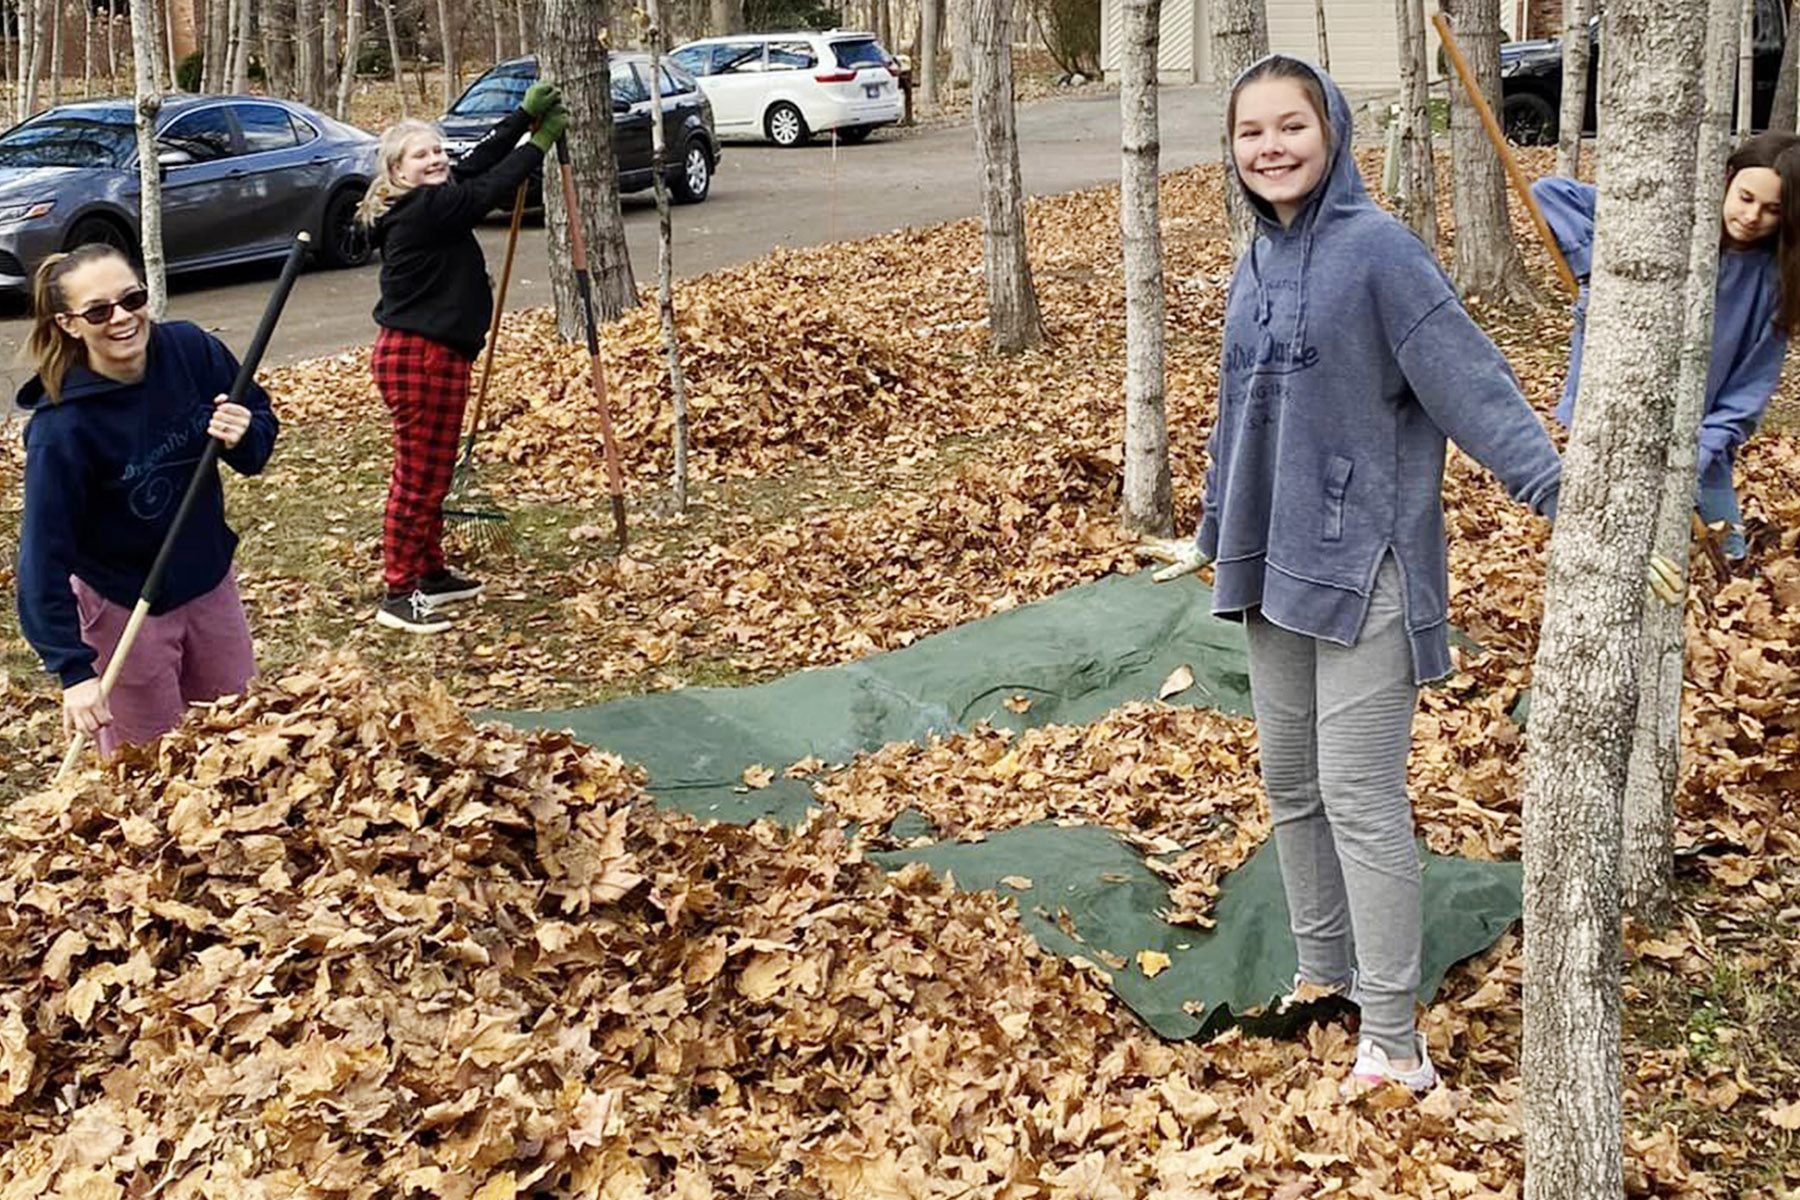 4 girls serving by raking fall leaves. Each is bundled against the cold and holding a rake